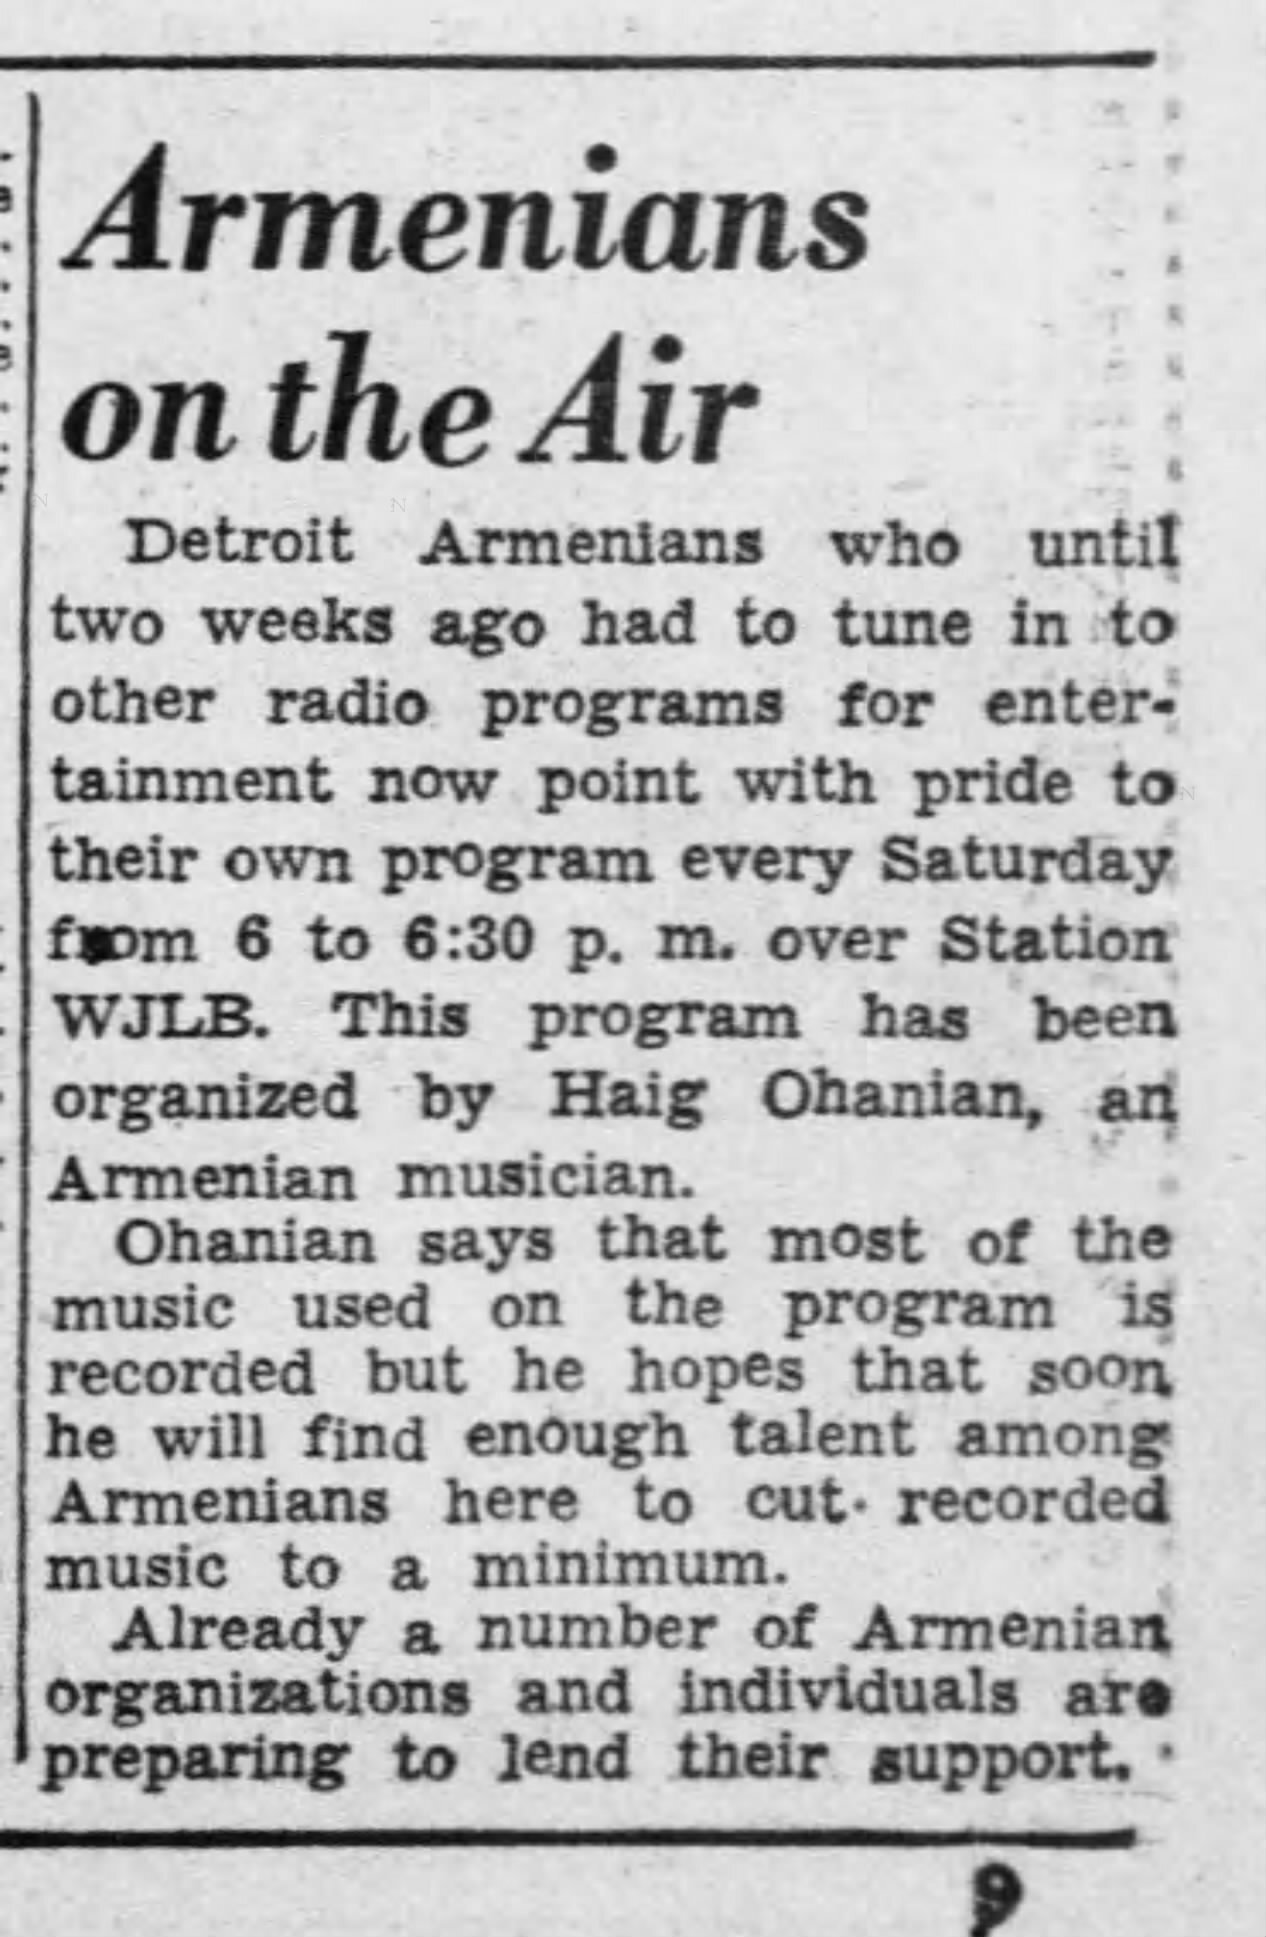  Listing for the Armenian radio hour organized by Haig Ohanian on Detroit's WJLB station in June 6, 1943 issue of The Detroit Free Press (Image:  newspapers.com ) 